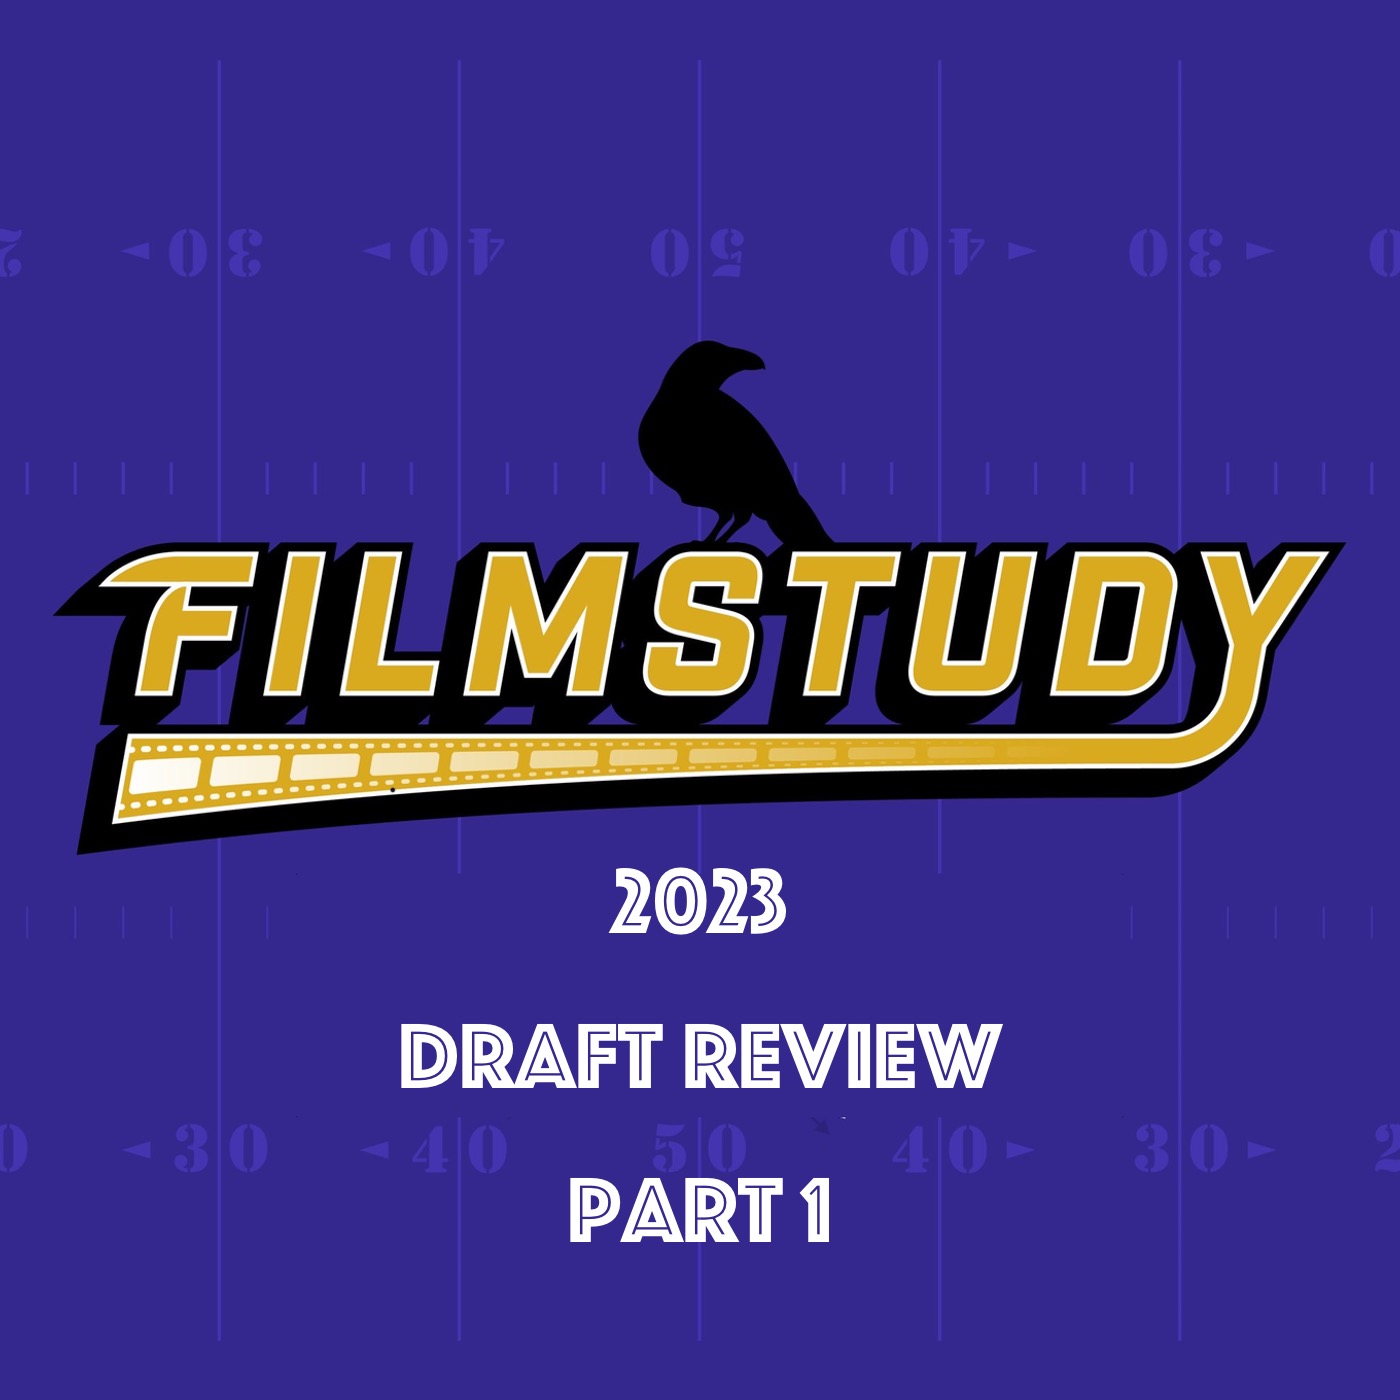 2023 Draft Review Part 1